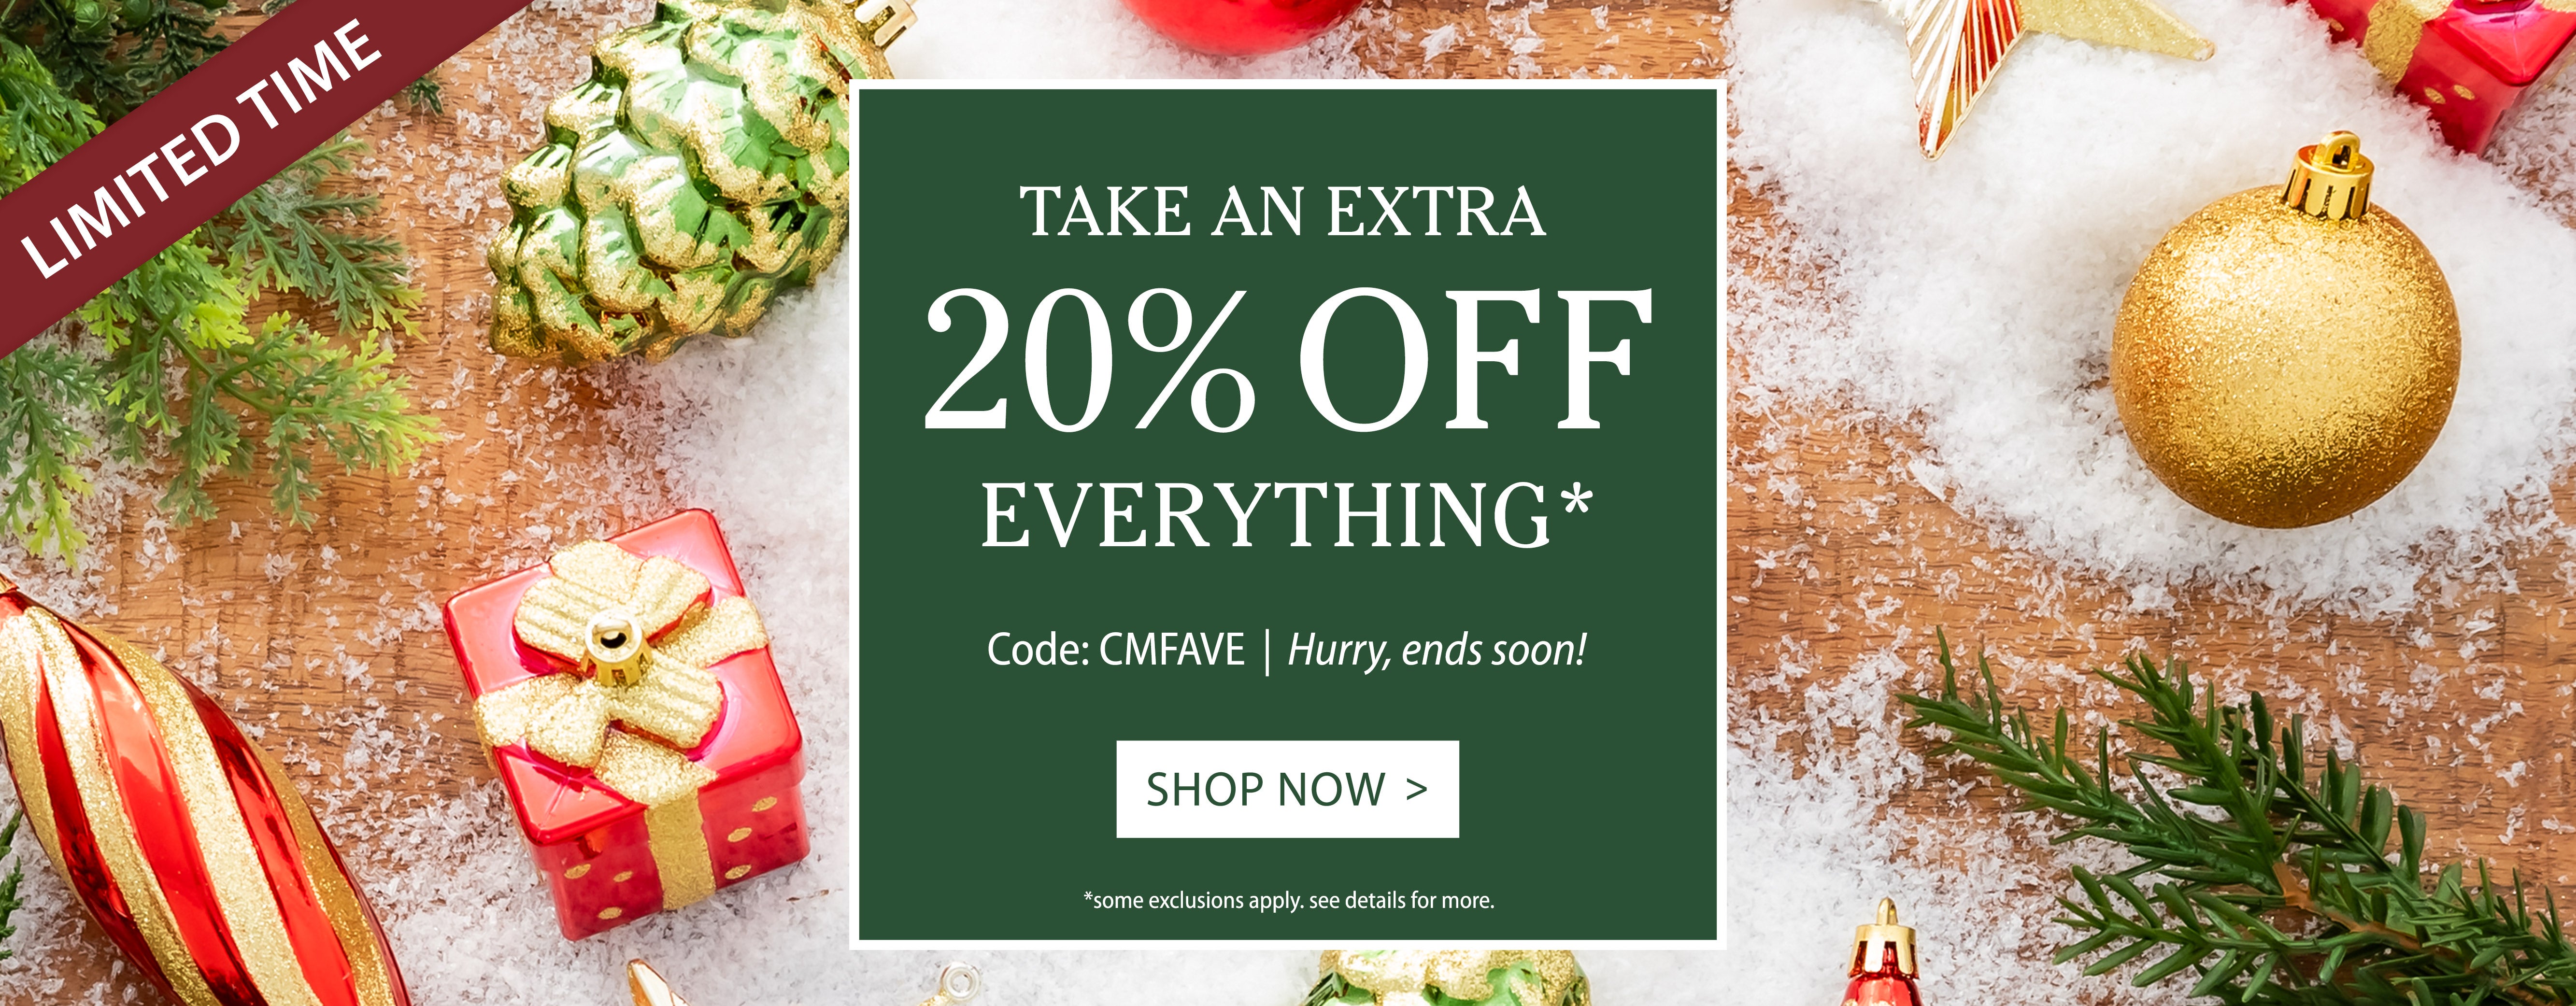 Image of ornaments. LIMITED TIME TAKE AN EXTRA 20% OFF EVERYTHING* use code CMFAVE. Hurry, ends soon. *some exclusiions apply. see details for more